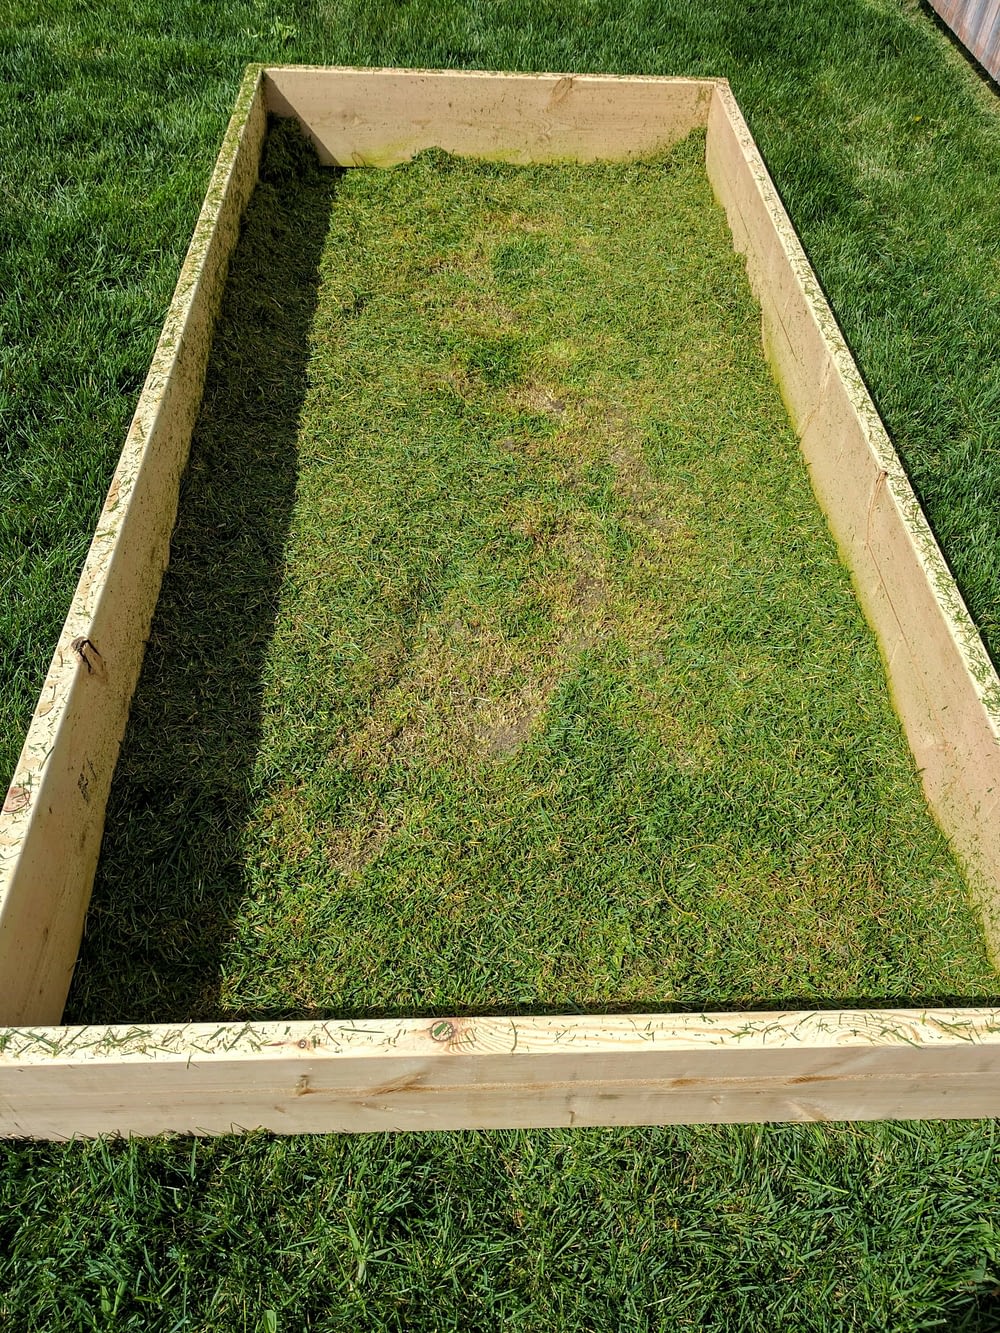 A raised garden bed frame with grass that has been cut on the inside of the frames